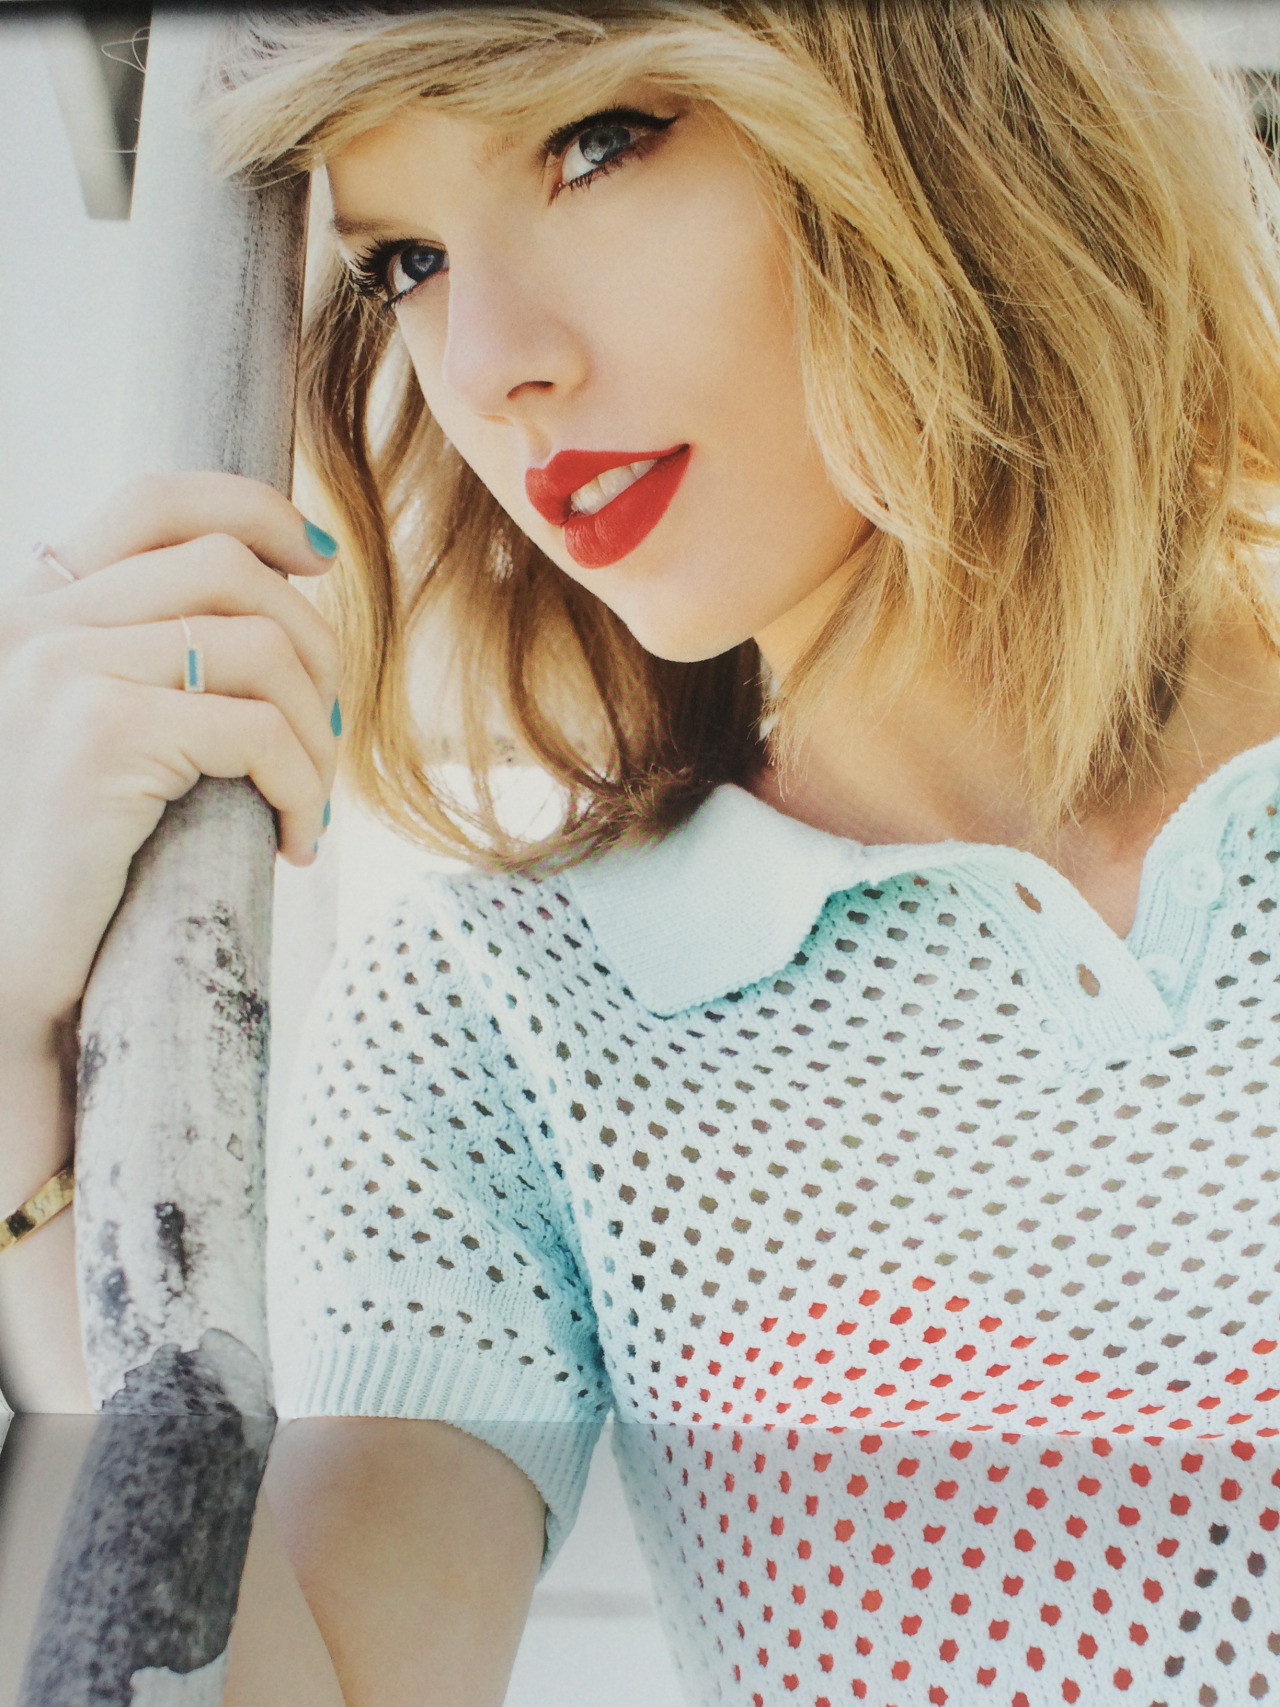 2016-official-calendar-011-taylor-swift-web-photo-gallery-your-online-source-for-taylor